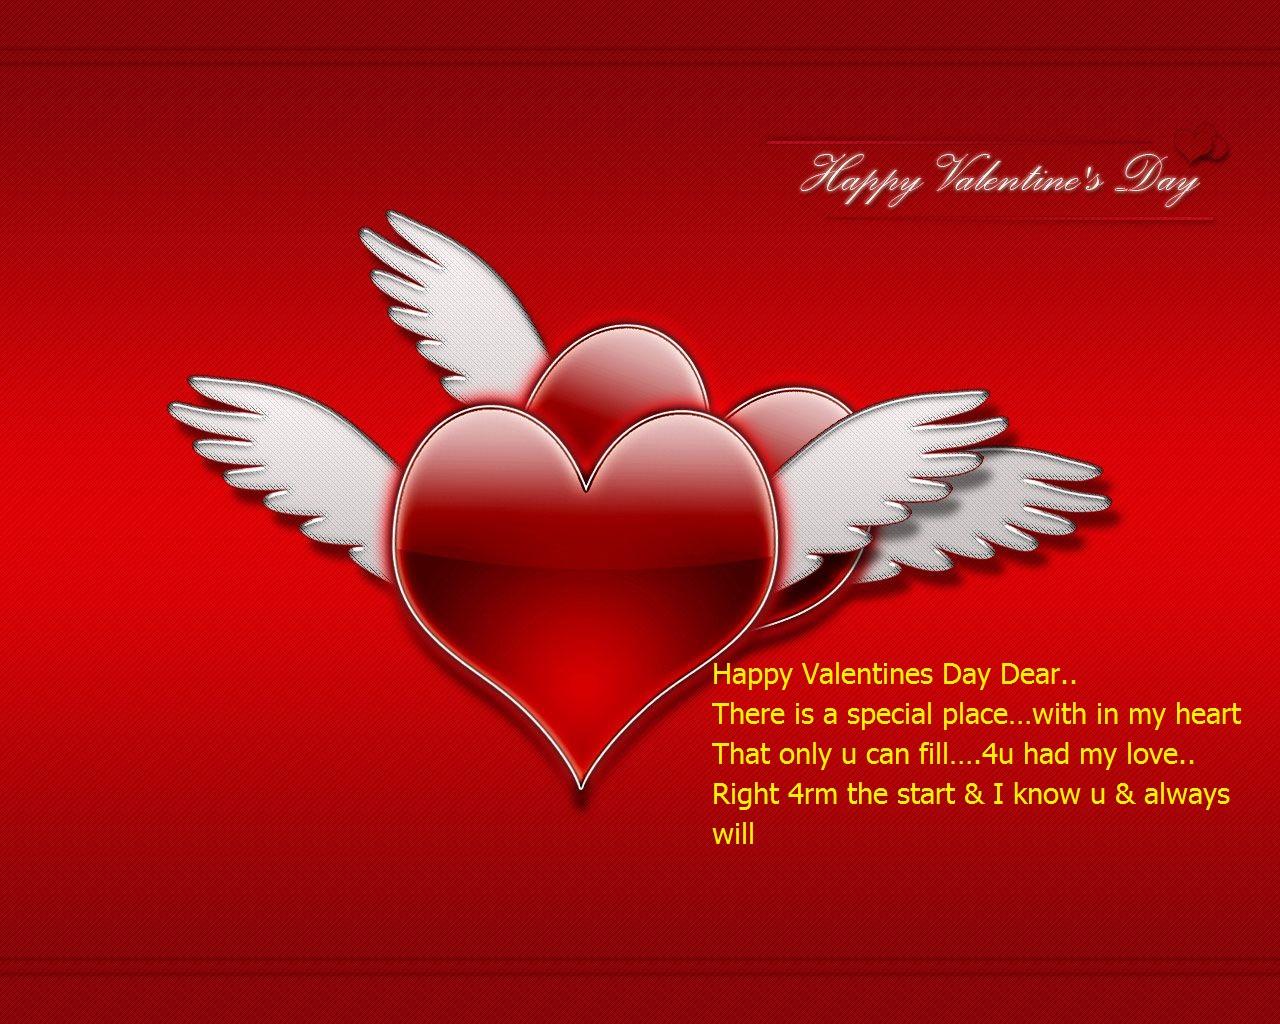 Happy Valentine's Day Wishes for You - (Love, Spouse & Friends)